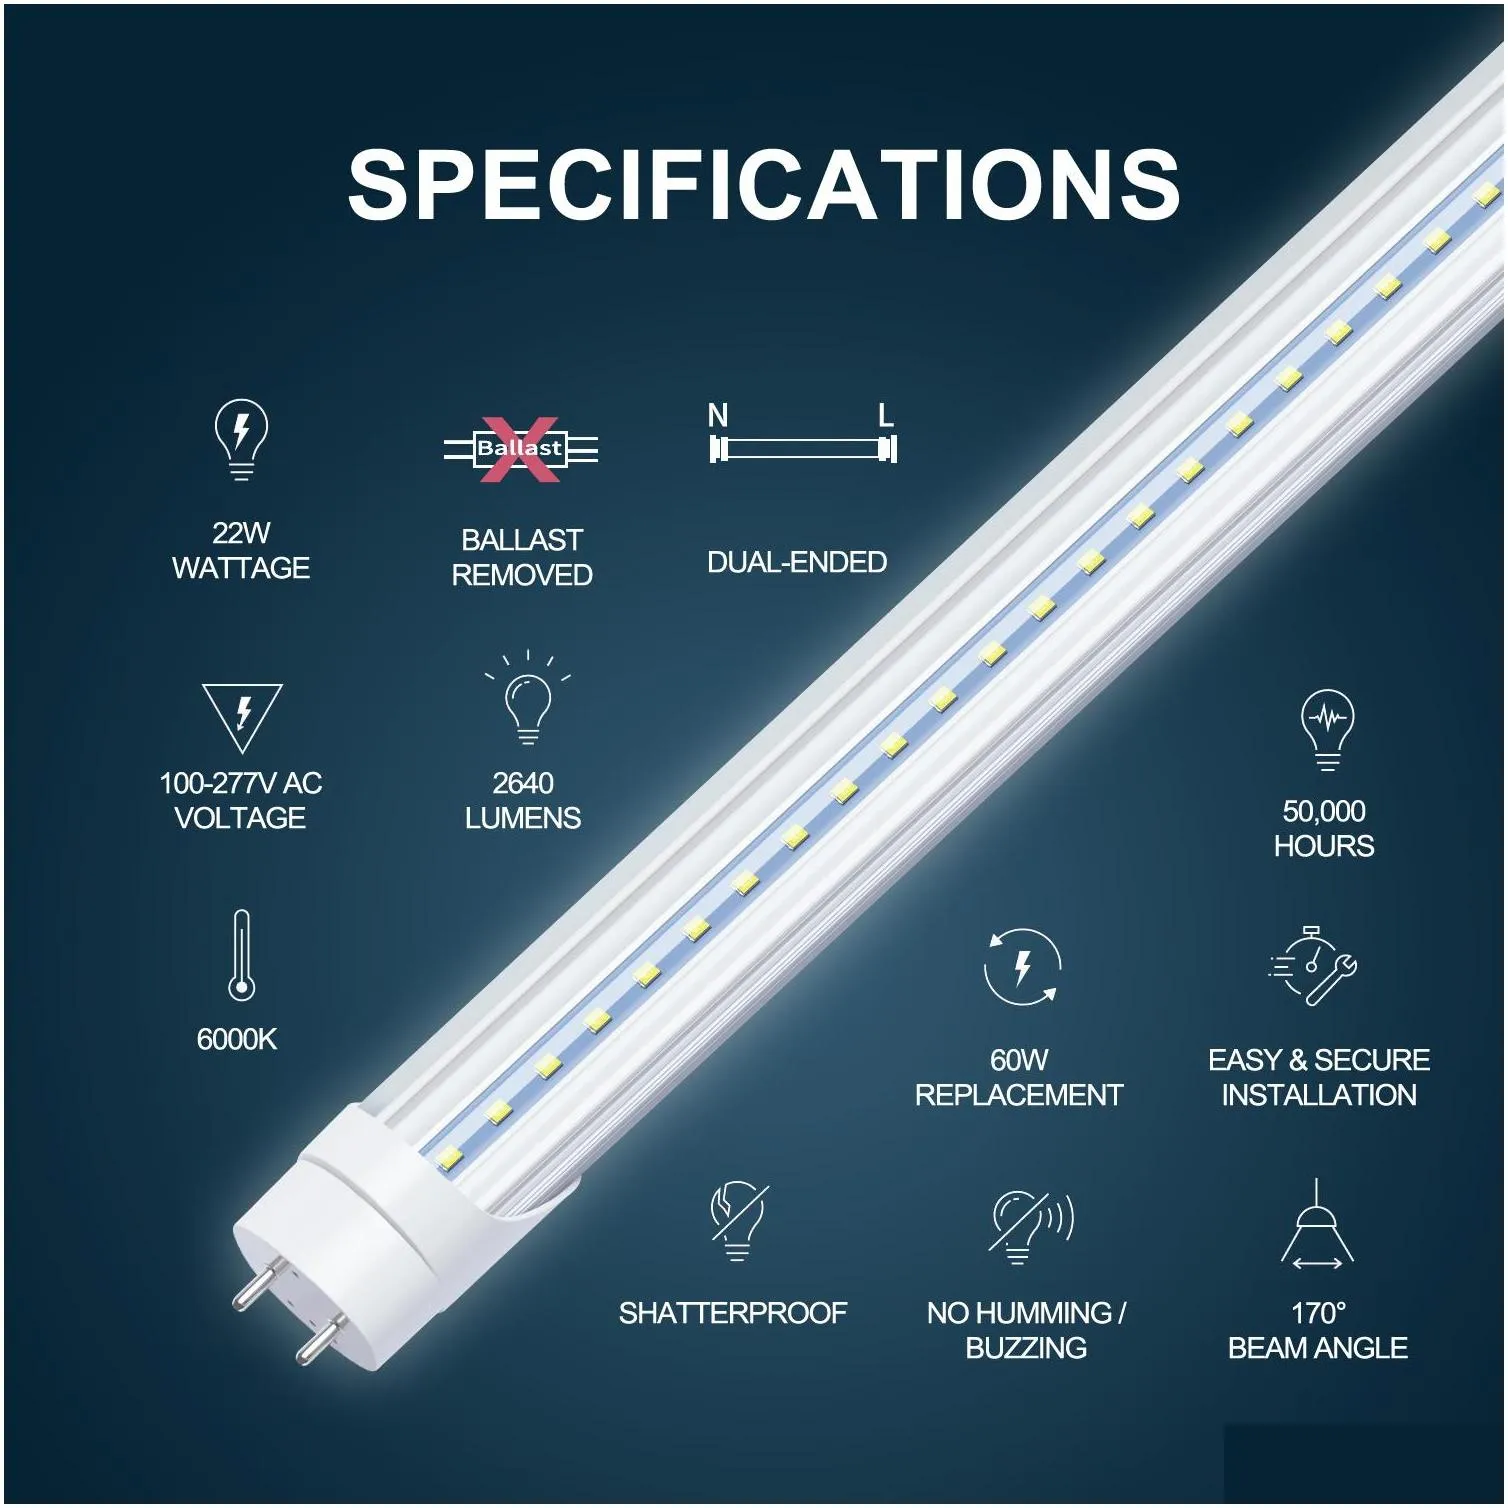 4ft led tube t8 18w 22w 28w g13 bi pin 4 garage warehouse lights 4 feet shop light fluorescent lamp replacement ballast removed dual ended